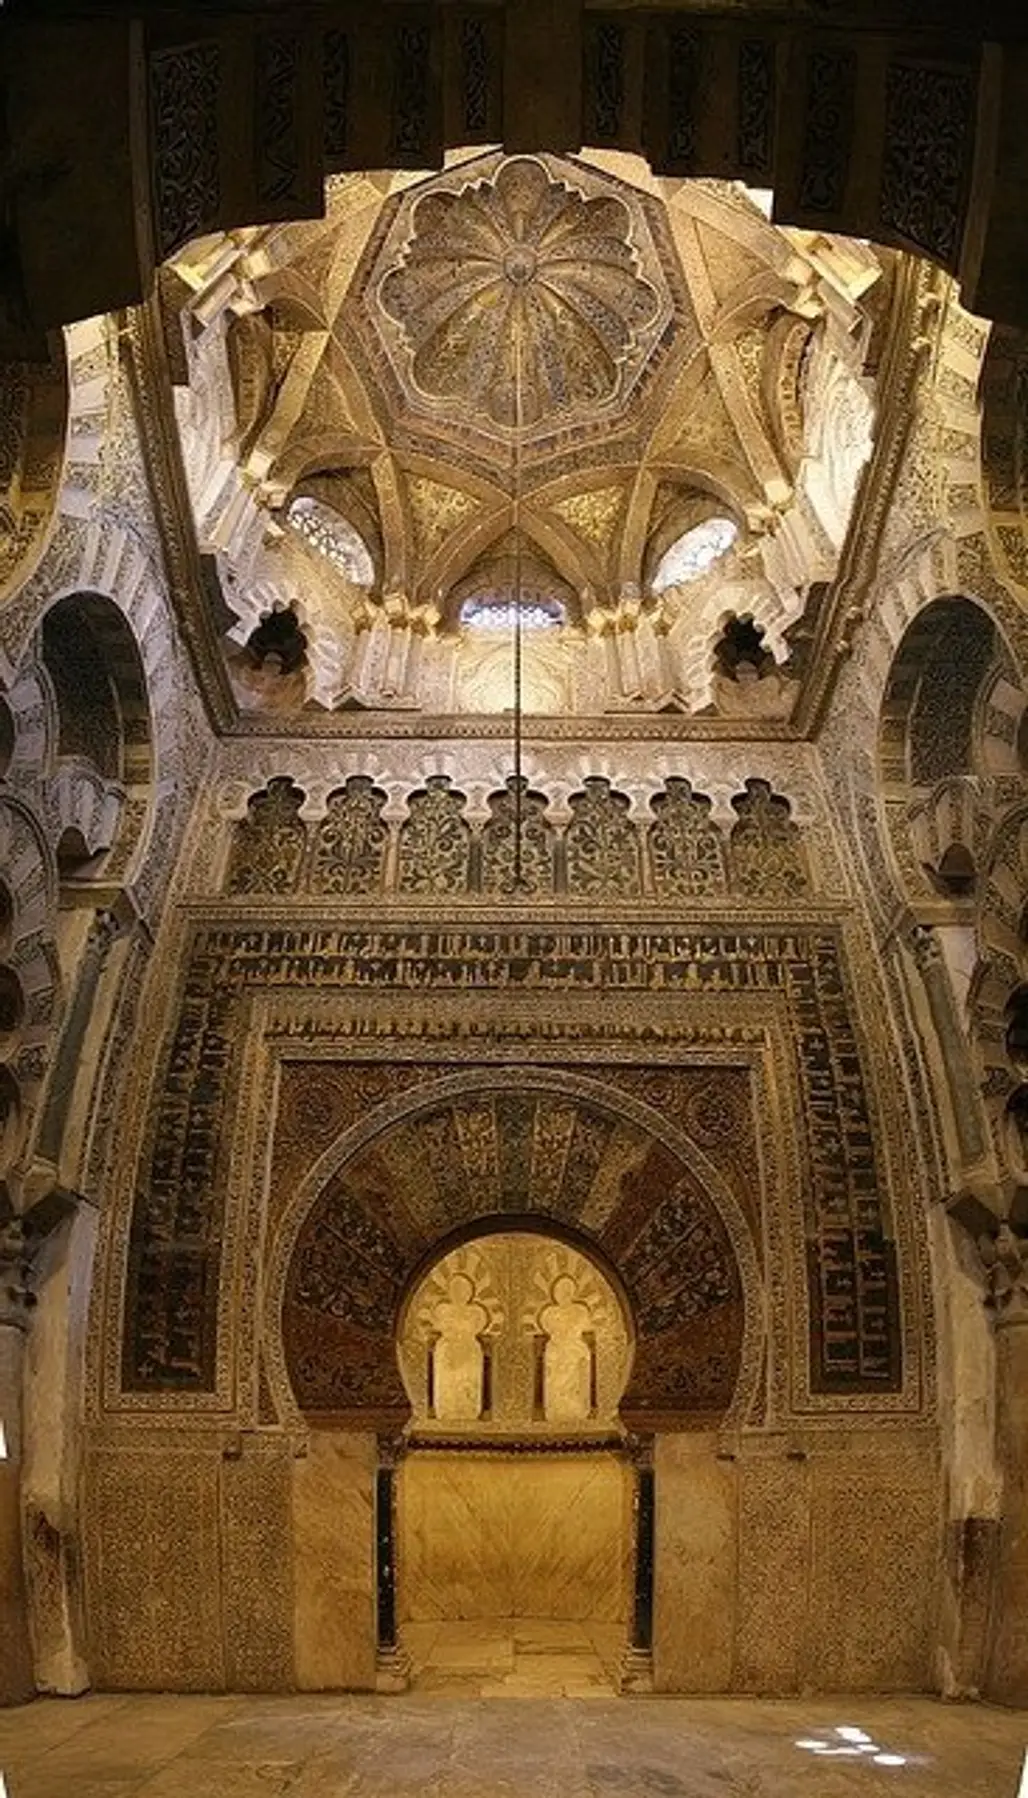 The Great Mosque, Cordoba, Spain